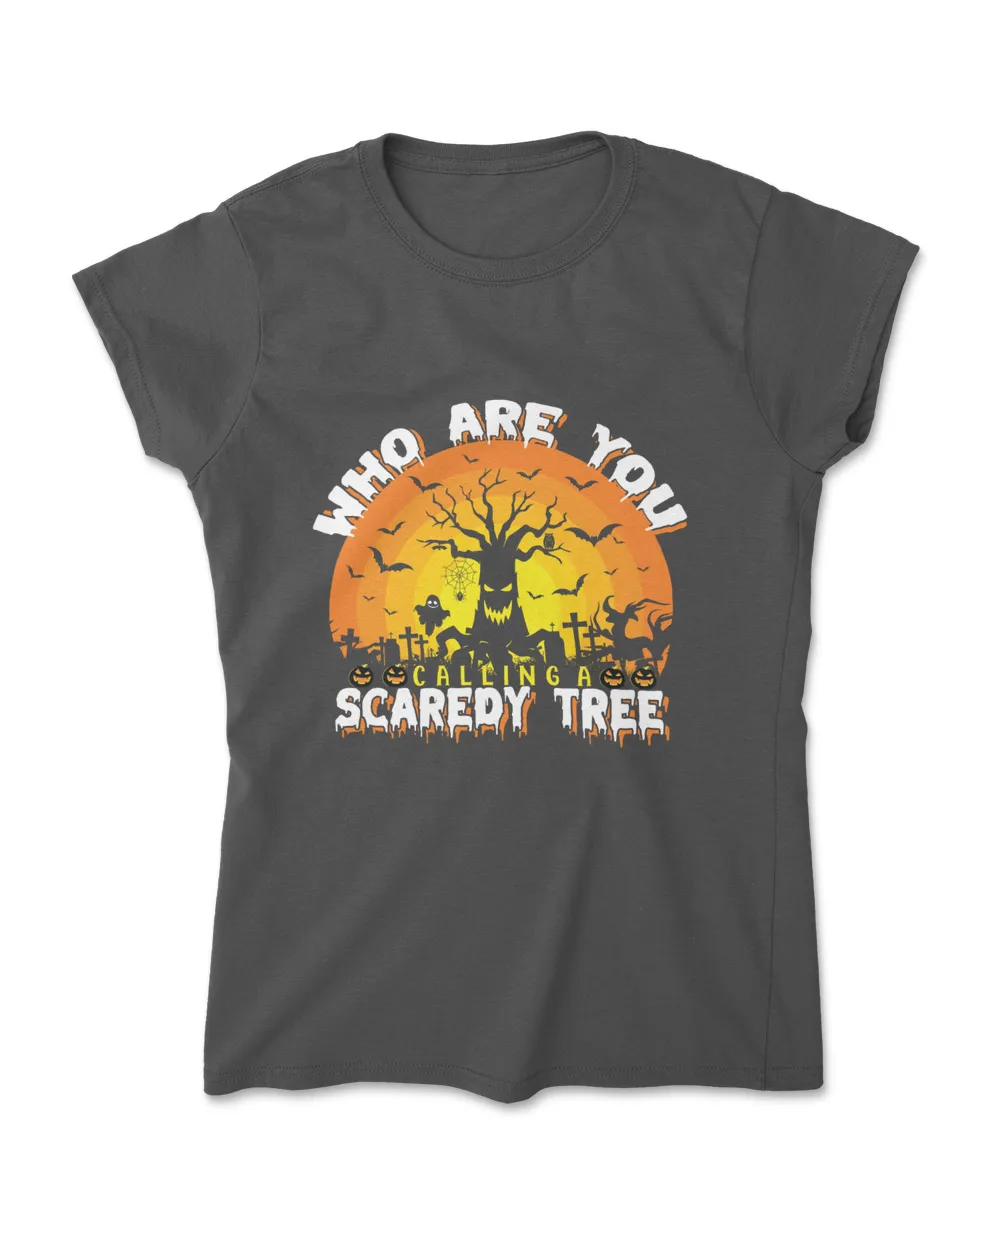 Who are you Scaredy Tree